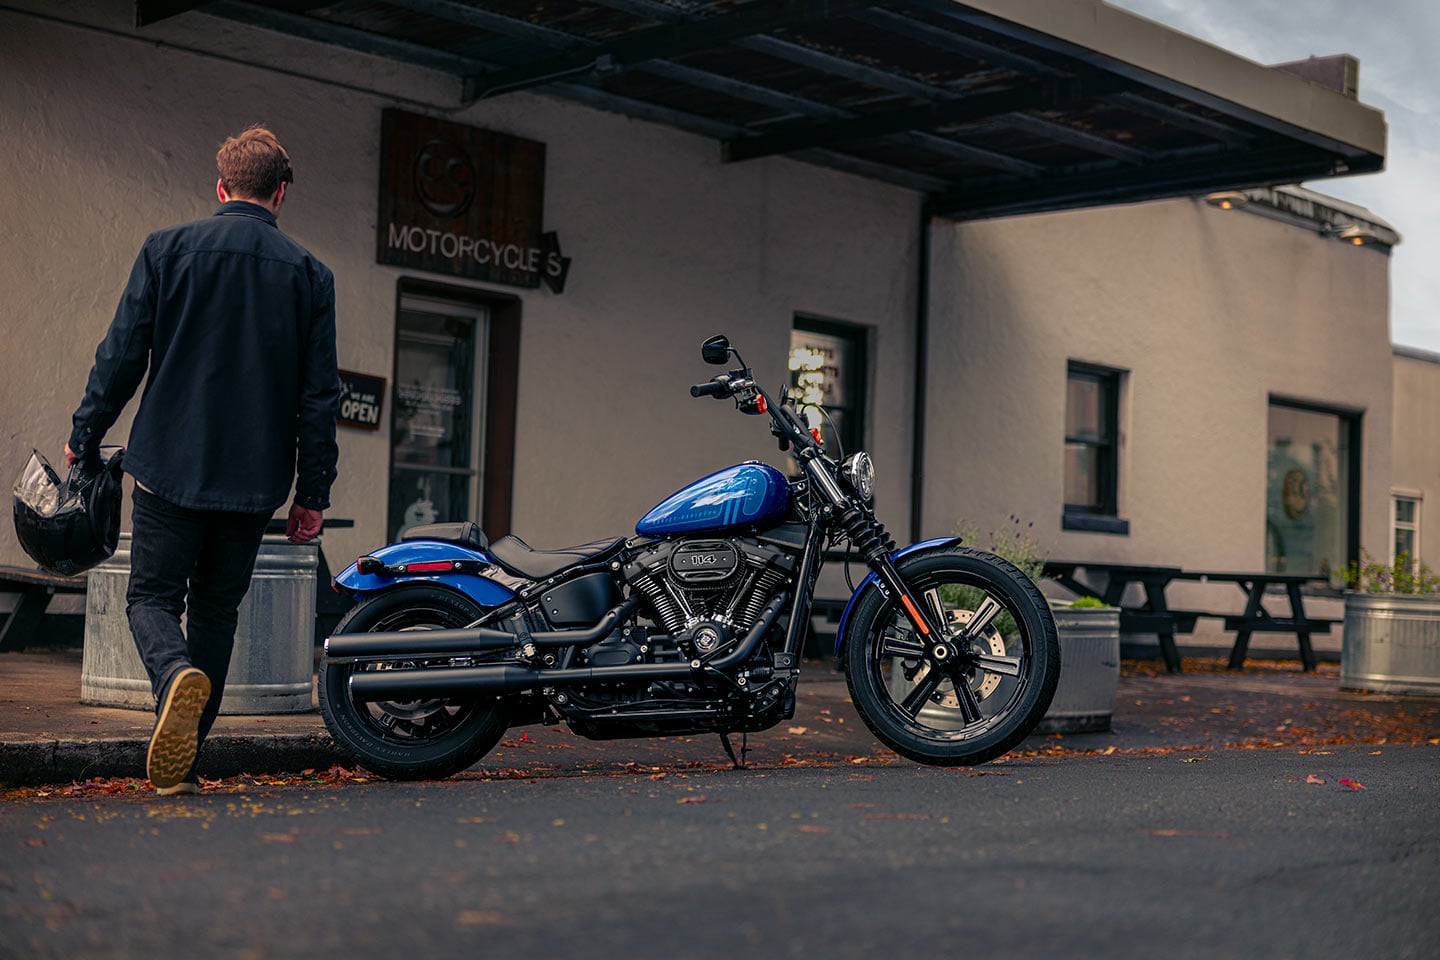 The heart of the Street Bob 114 is its Milwaukee-Eight 114 engine.